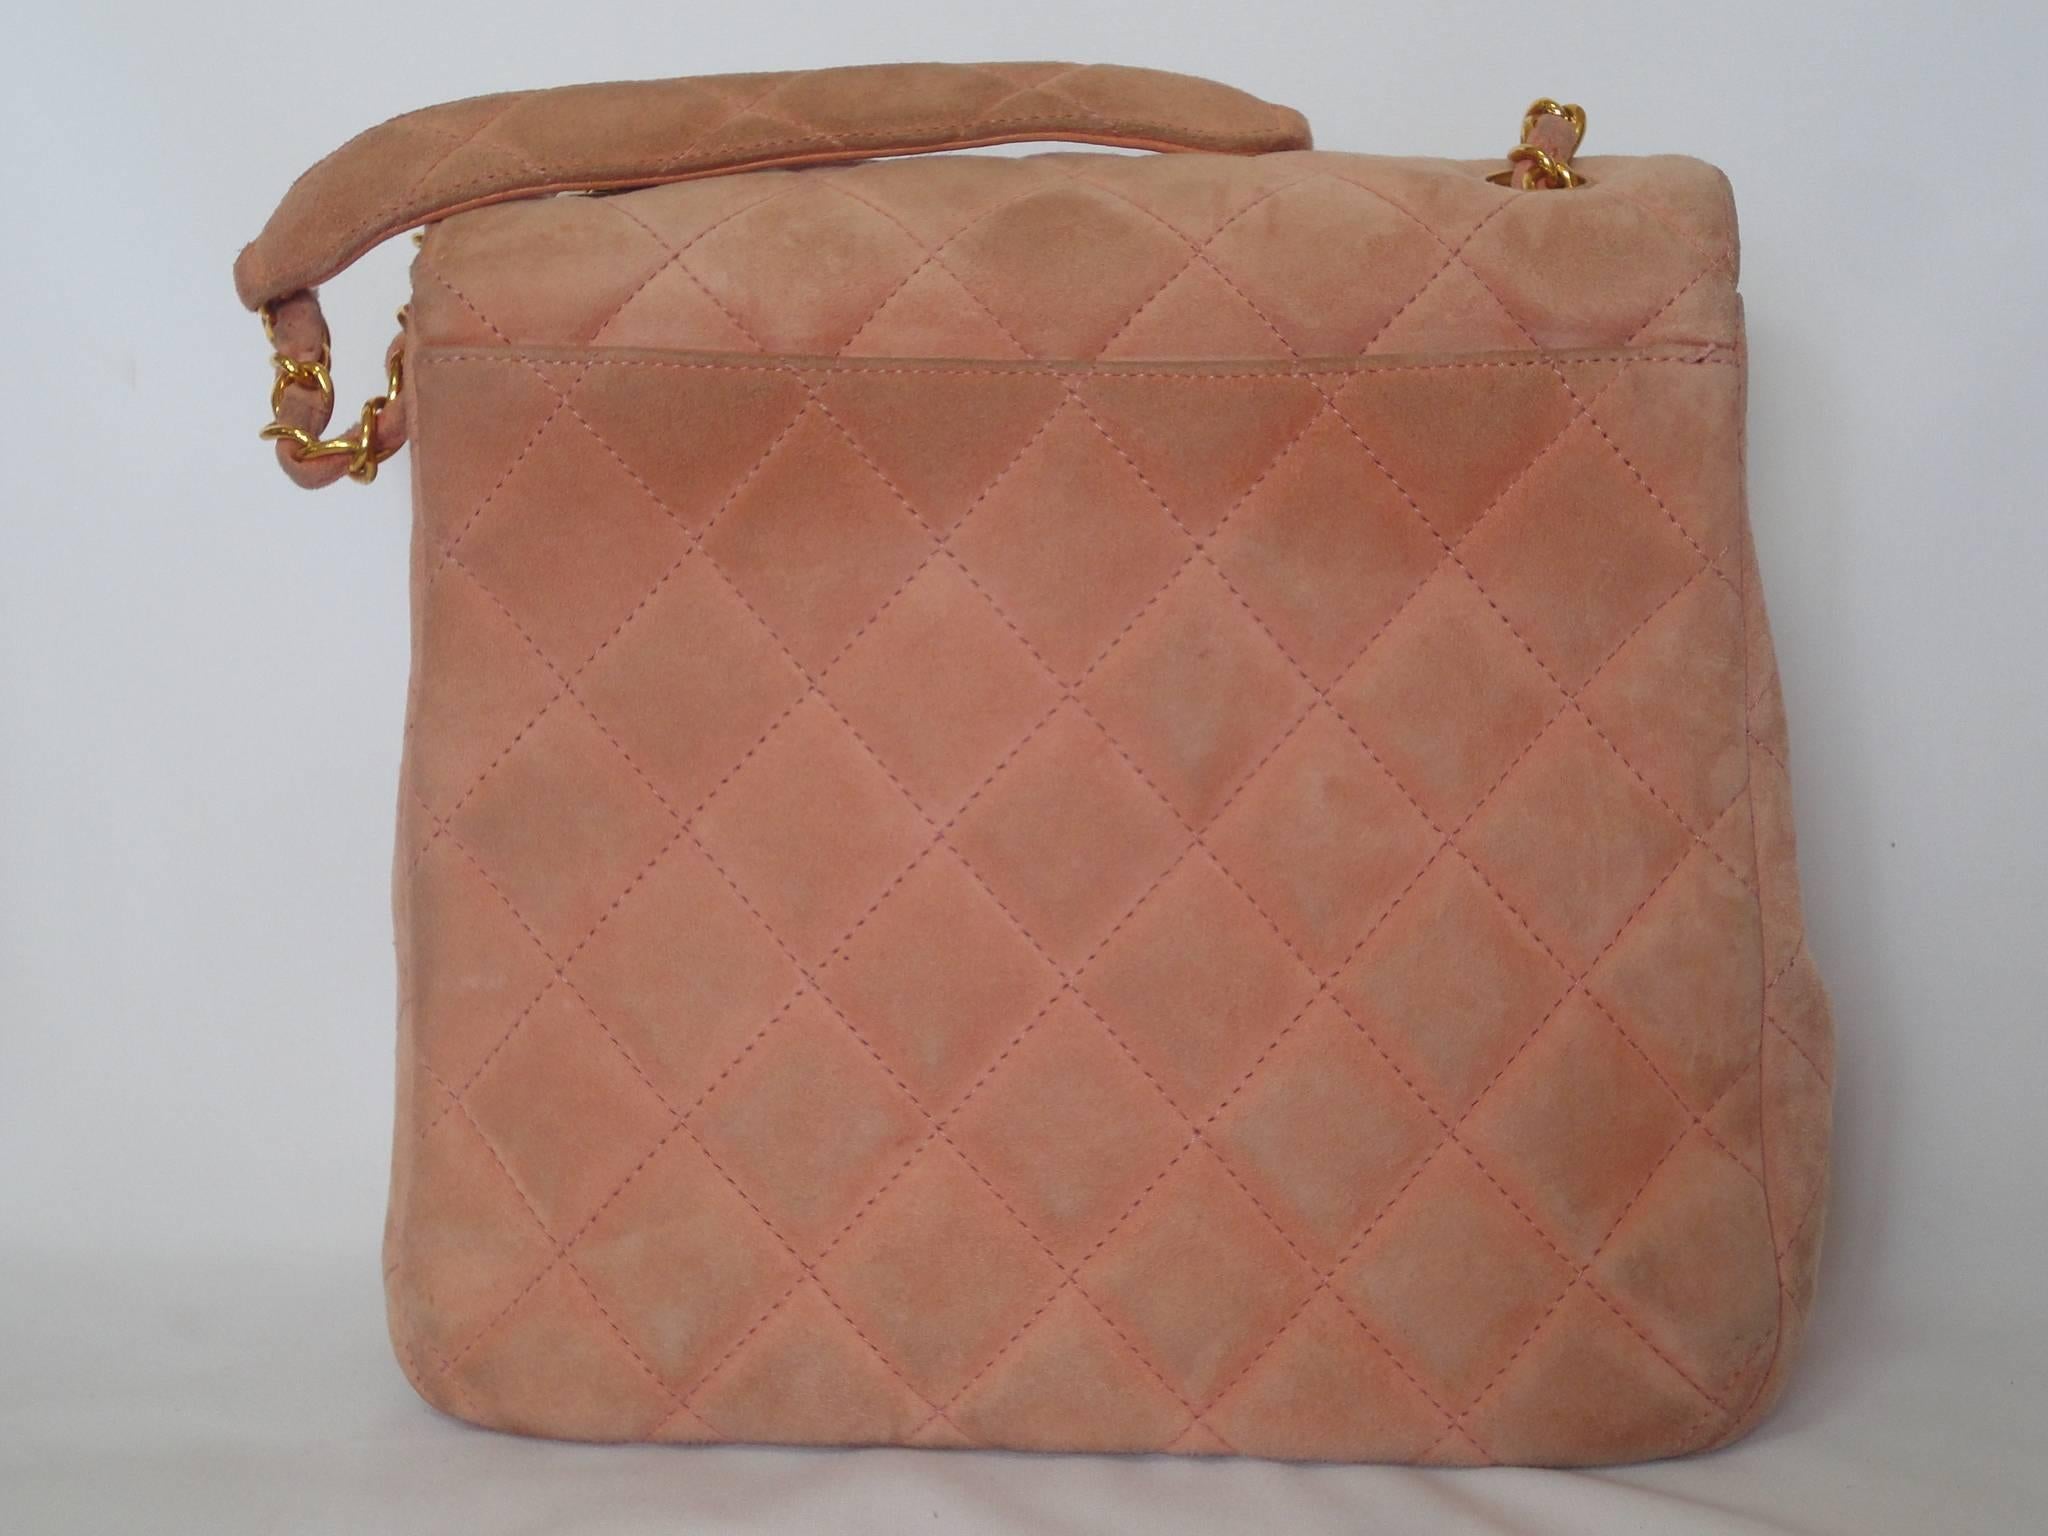 Vintage CHANEL light pink quilted suede 2.55 shoulder bag with gold tone chain strap. Very nice and soft classic purse.

Introducing another vintage shoulder bag, light pink square bag in genuine suede leather from Chanel in the 90's.
Still in a